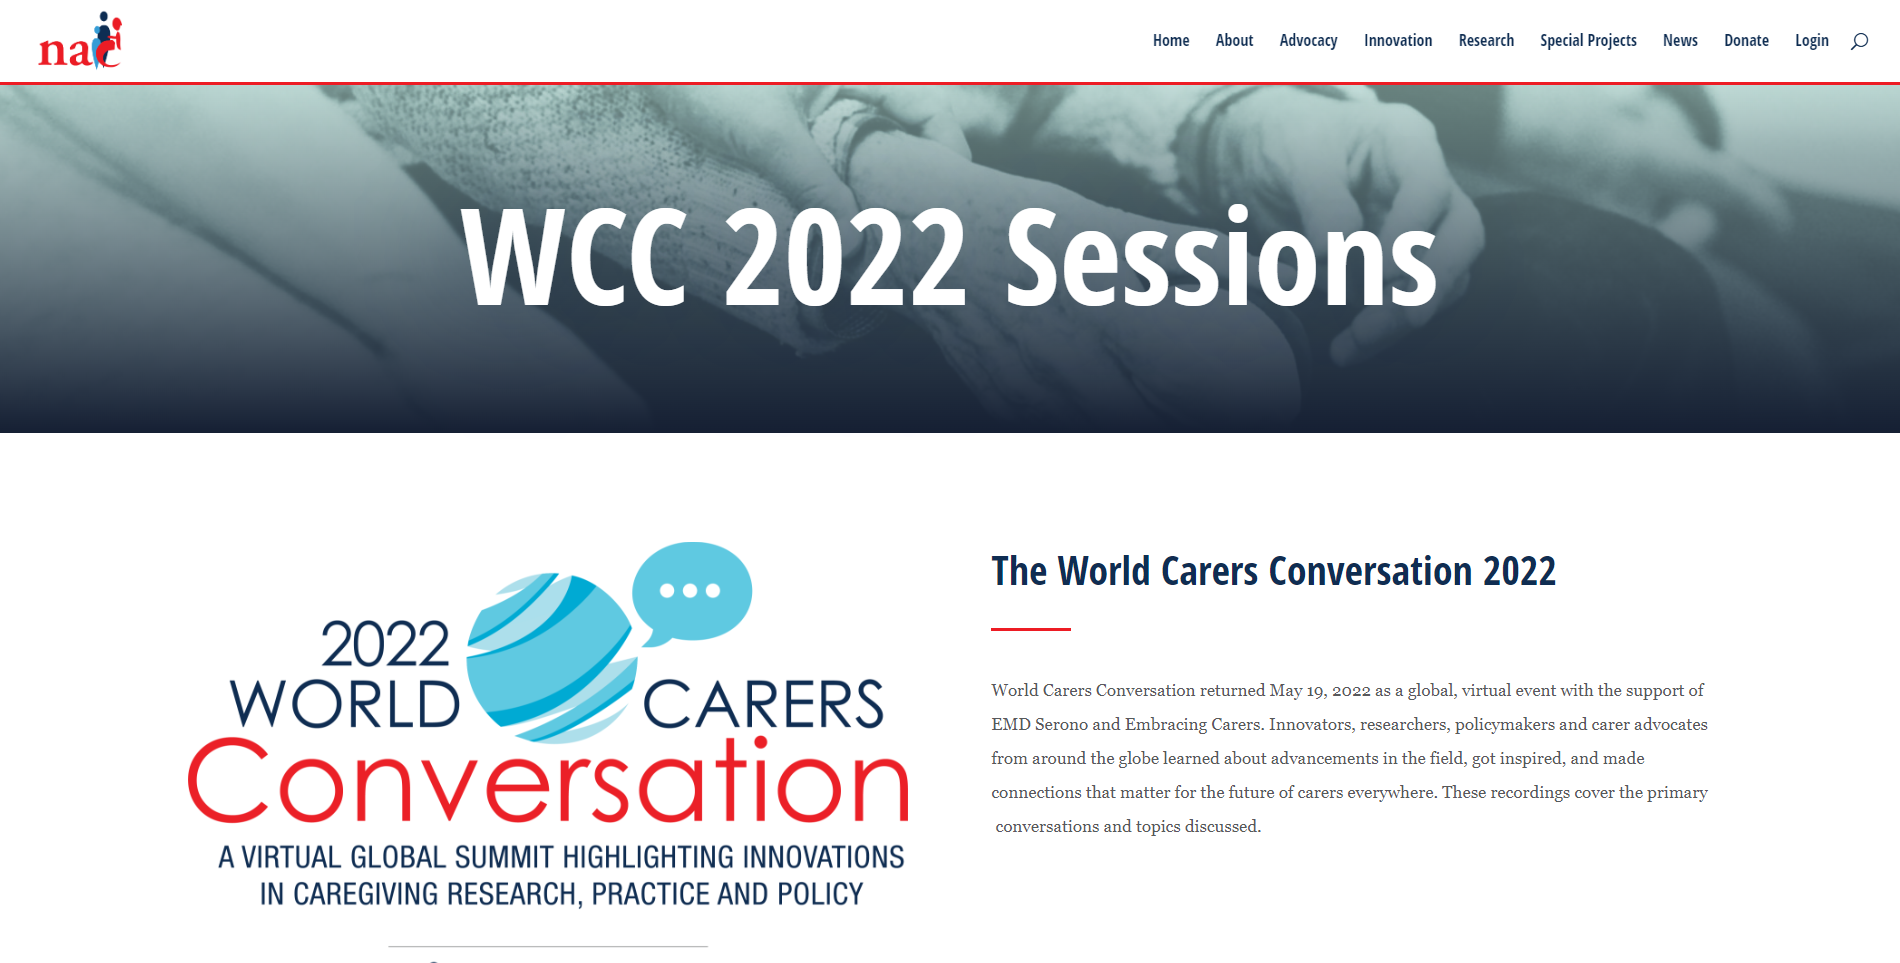 The World Carers Conversation 2022